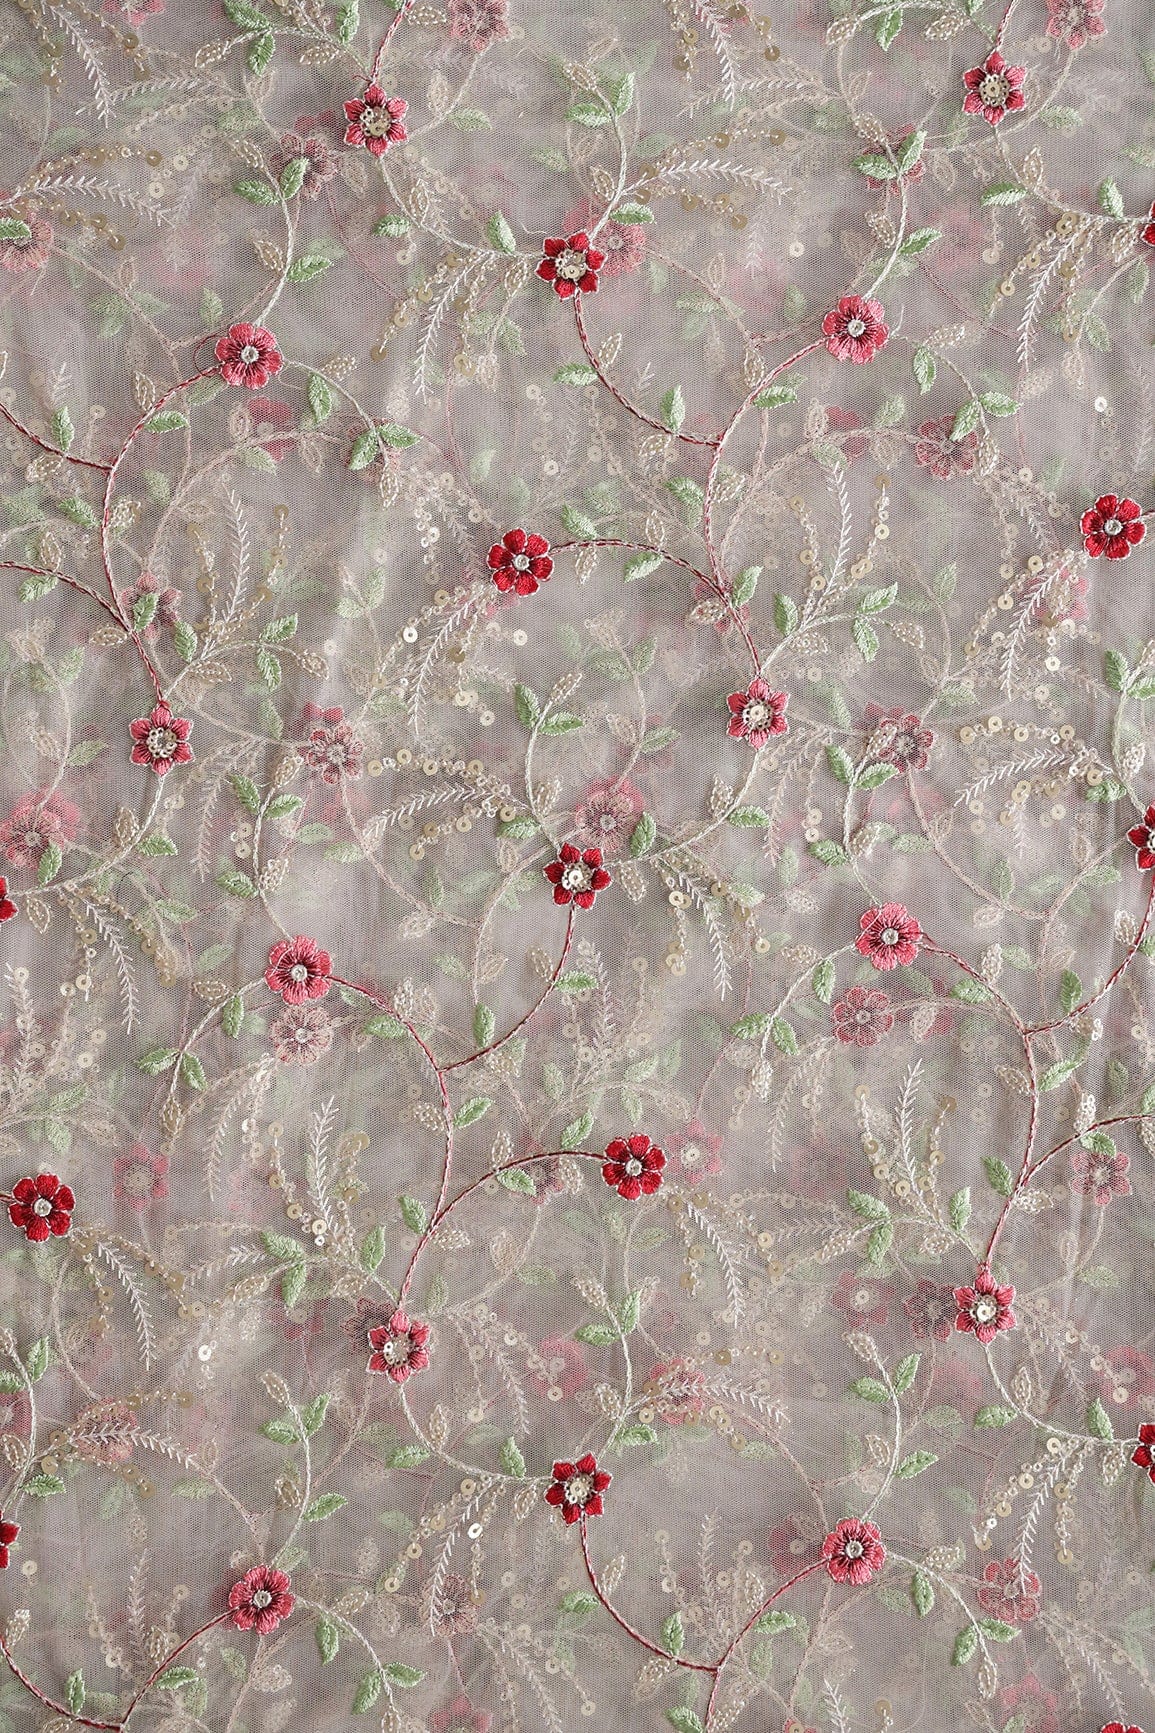 doeraa Embroidery Fabrics Red And Olive Thread With Gold Sequins Small Floral Embroidery On Light Grey Soft Net Fabric